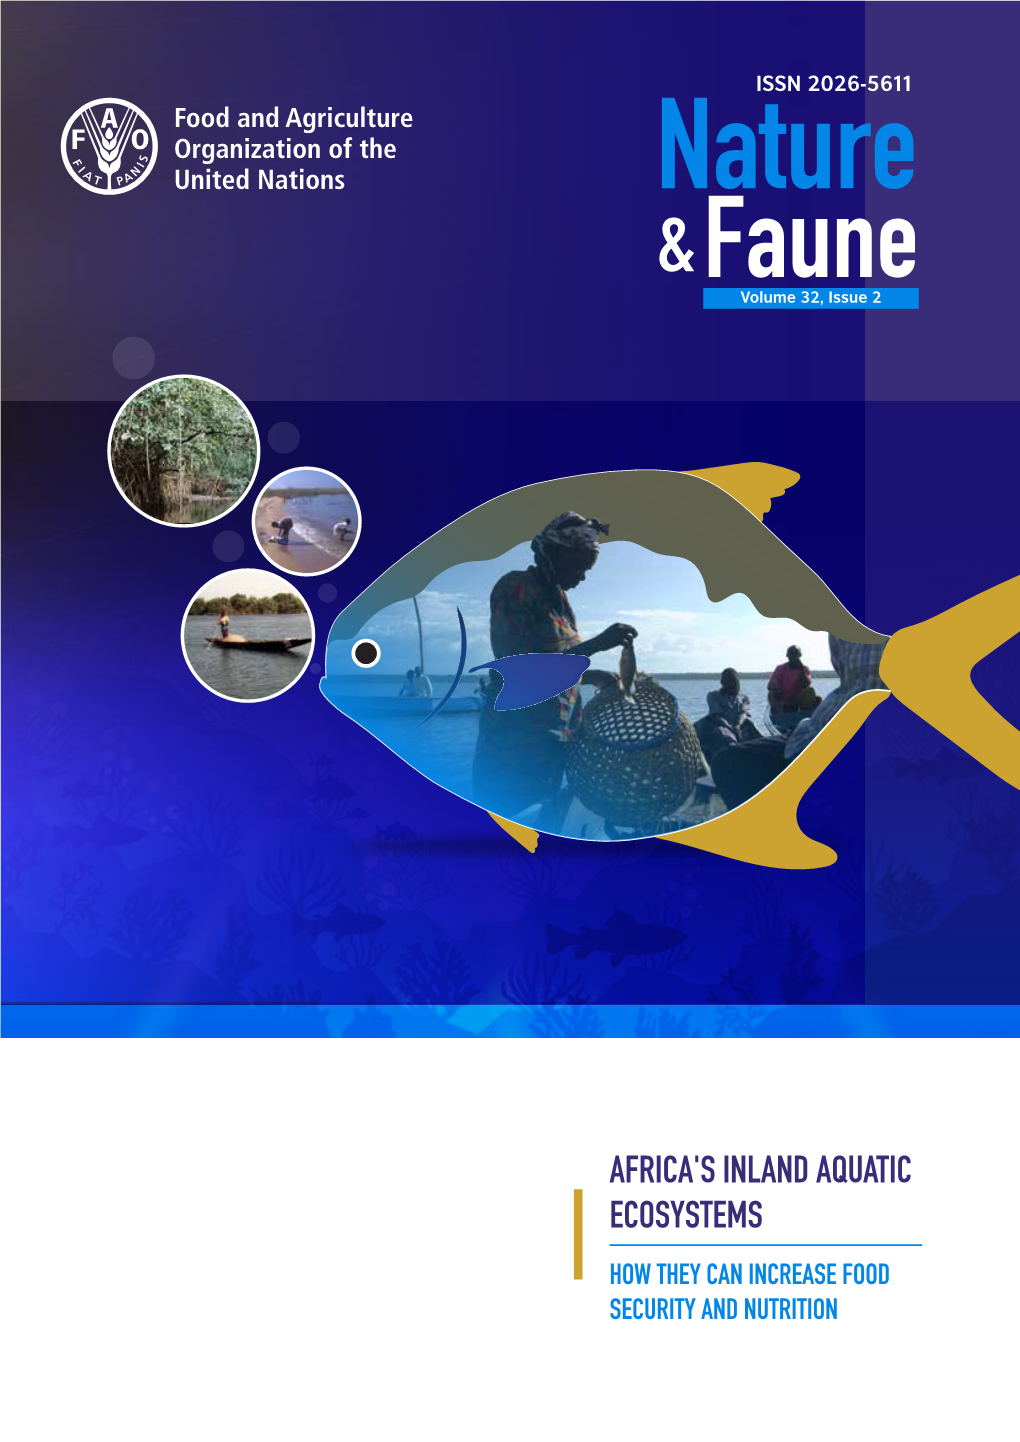 Africa's Inland Aquatic Ecosystems How They Can Increase Food Security and Nutrition